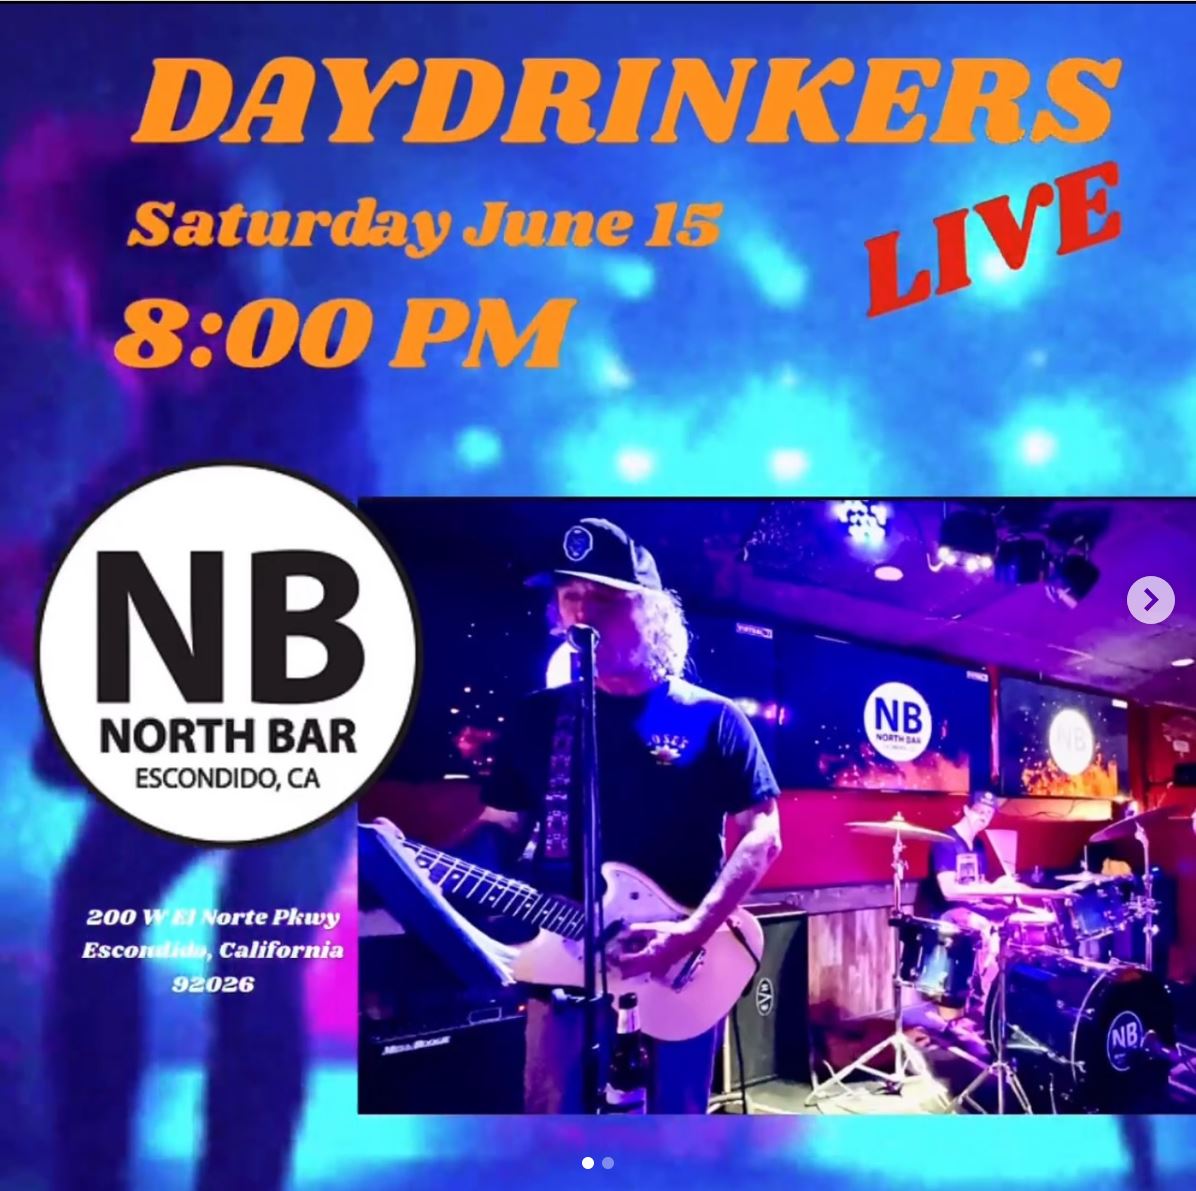 Live Music Daydrinkers – The North Bar